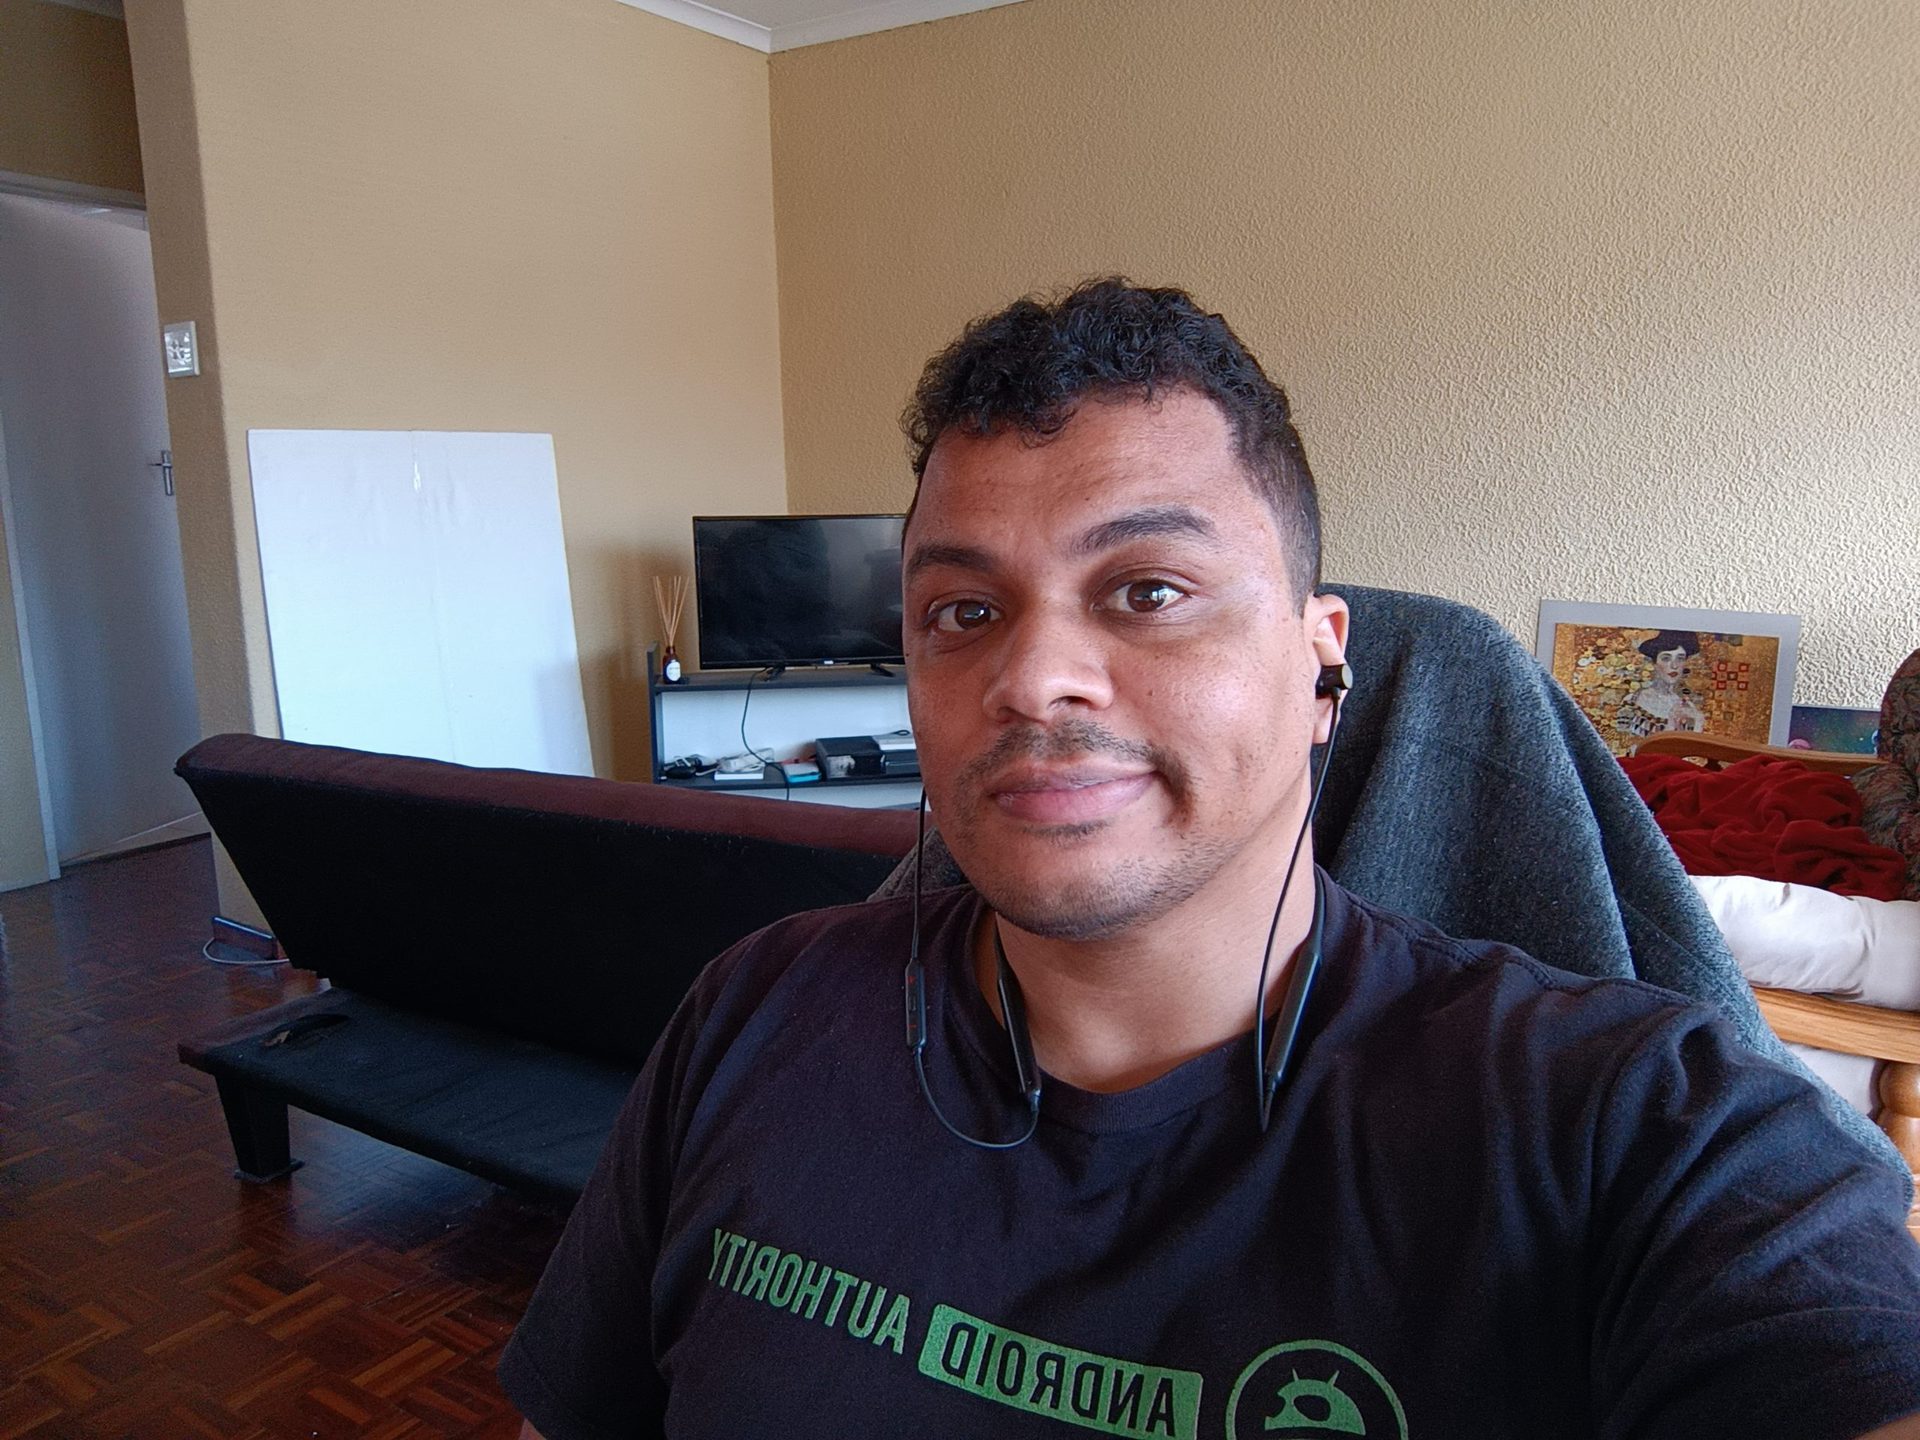 Poco M4 Pro selfie camera shot of a man with short dark hair wearing a dark colored Android Authority t-shirt